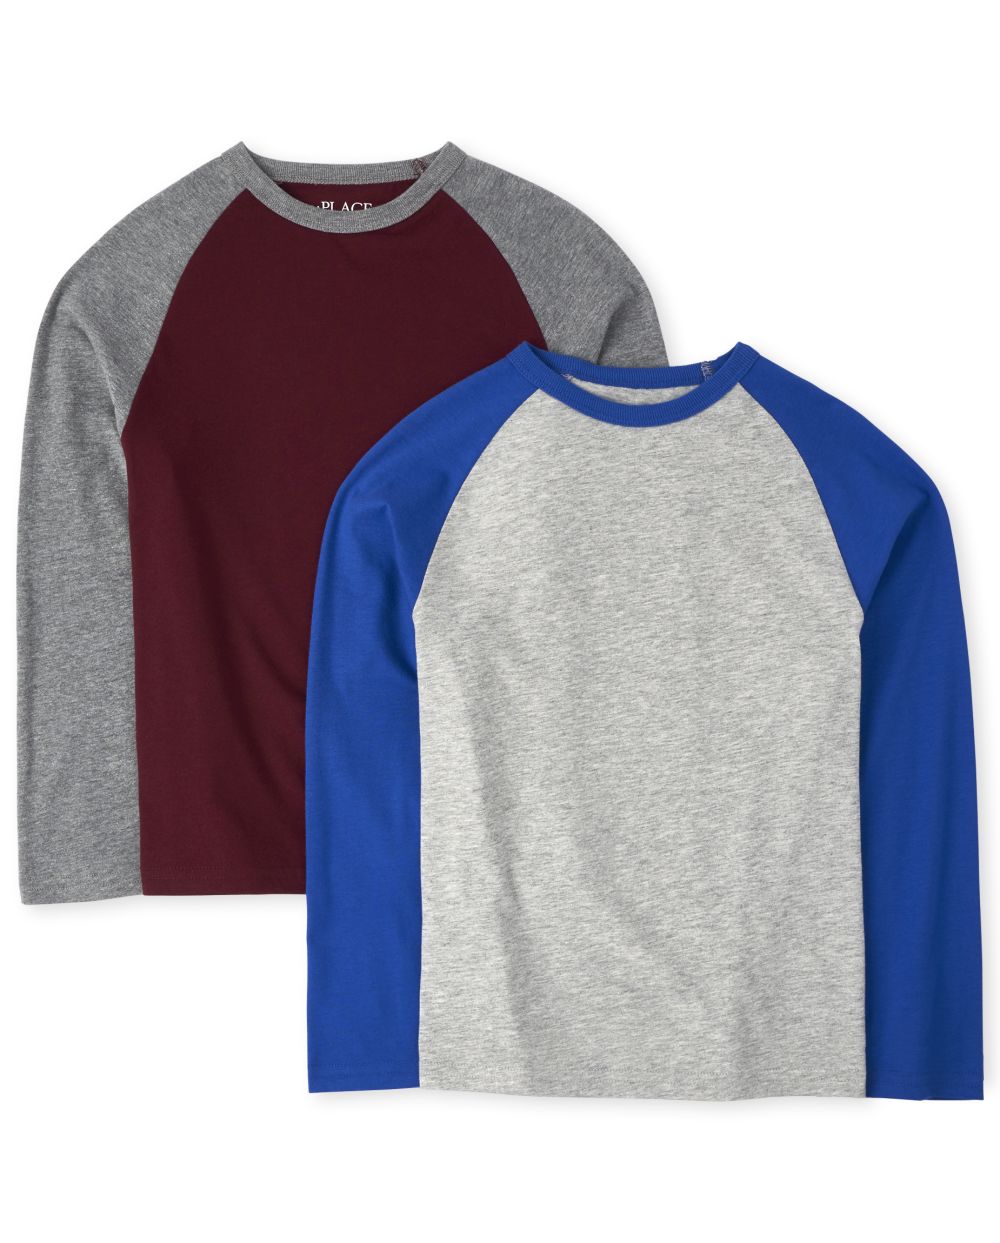 

s Boys Raglan Top 2-Pack - Red - The Children's Place